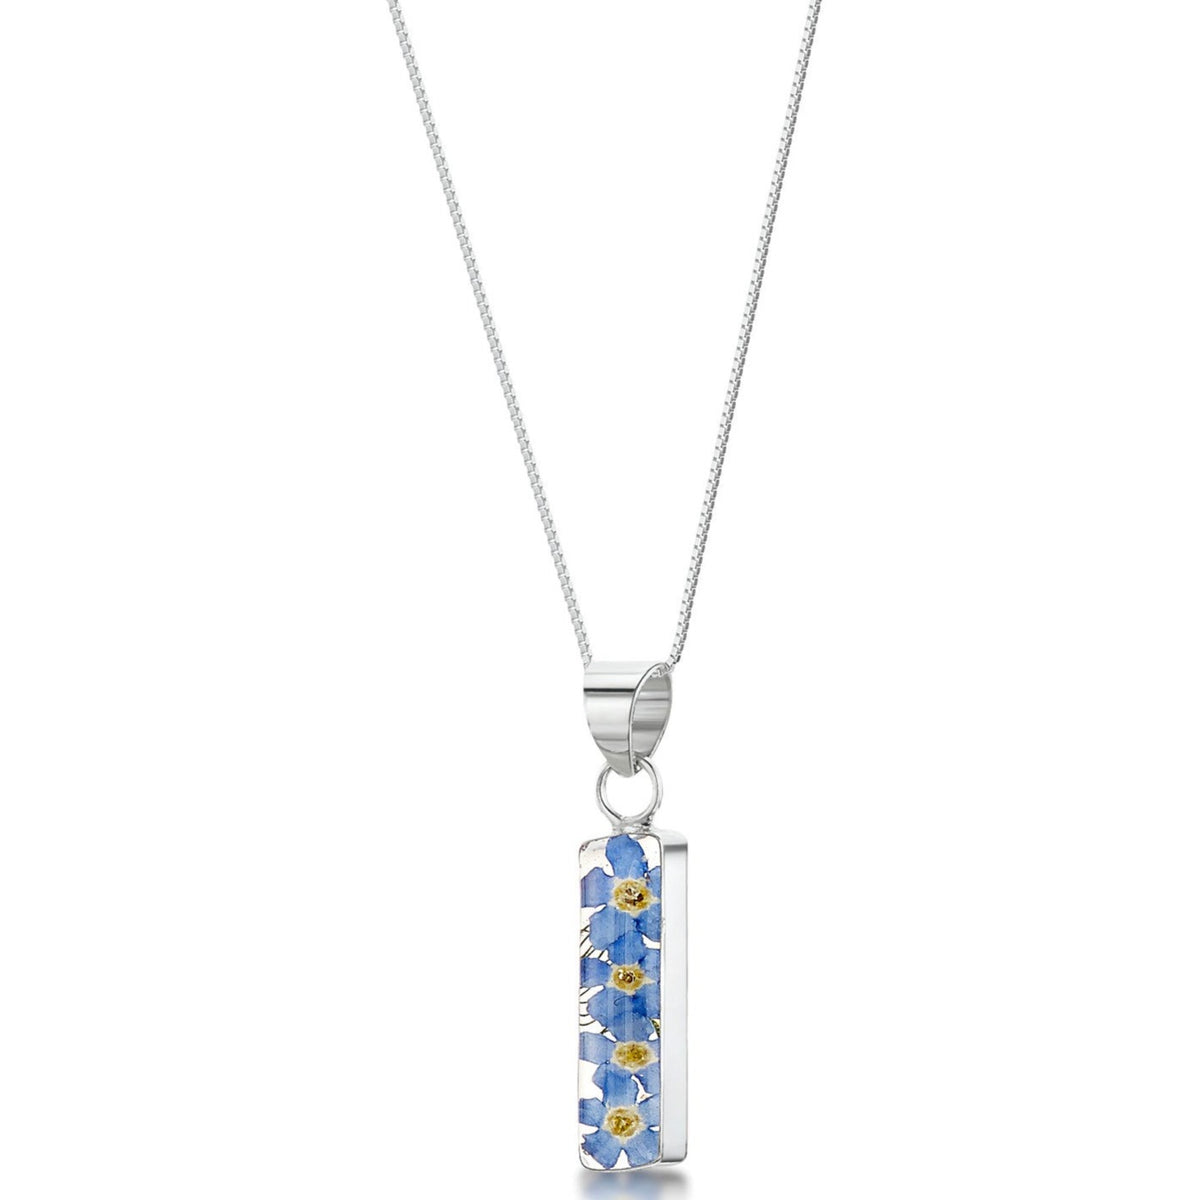 Sterling silver rectangle bar pendant with real forget-me-not flowers set in resin. Hangs on an 18&quot; adjustable sterling silver chain.